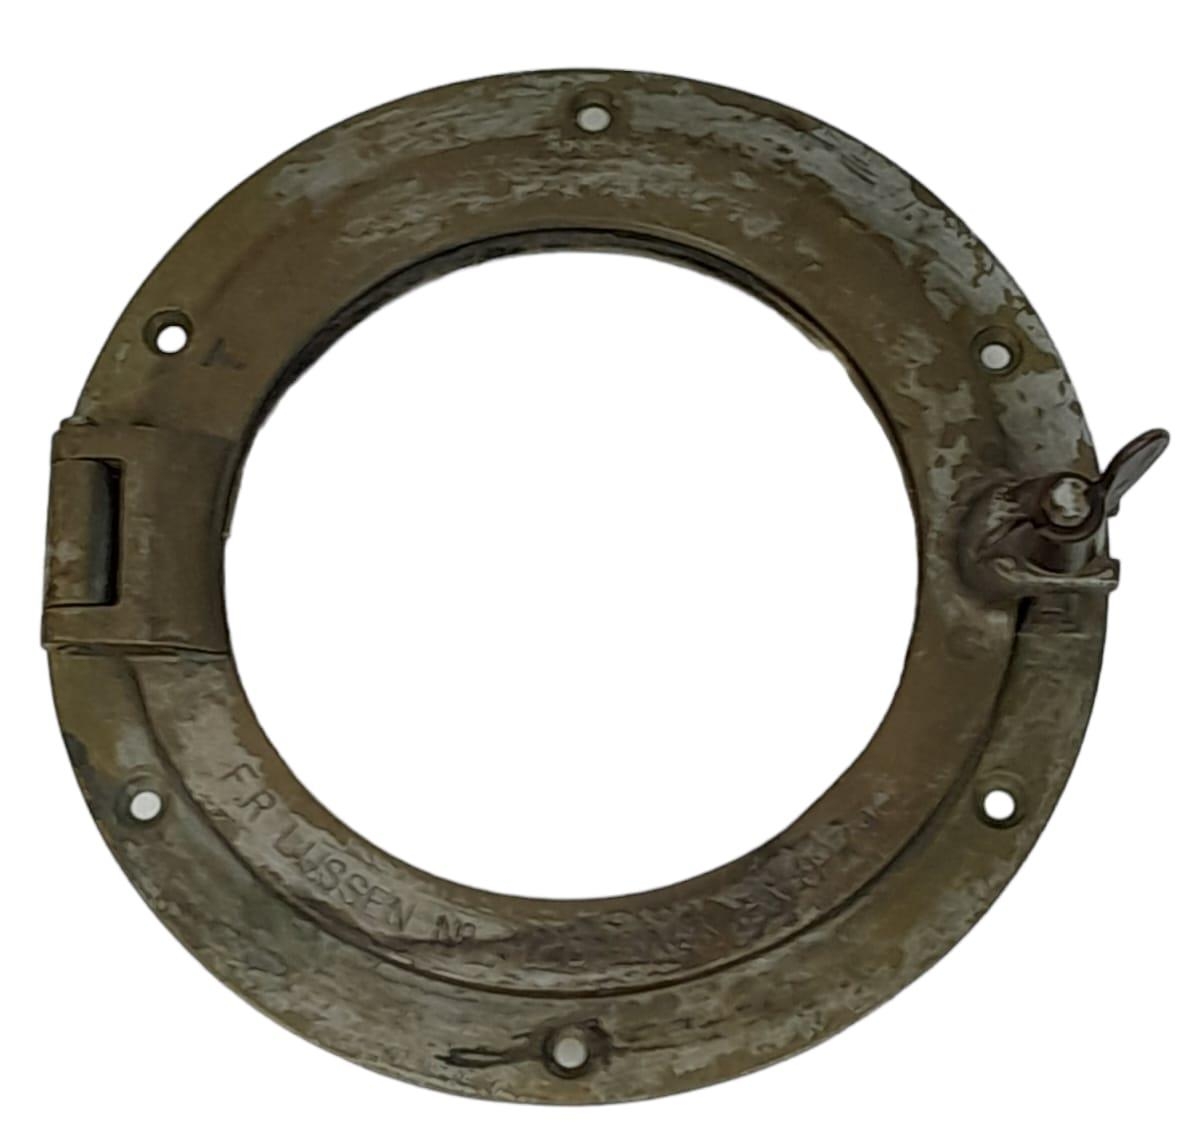 WW2 German Kriegsmarine Schnell Boot (Fast Boat) Inner Porthole. These boats were nicknamed “E-